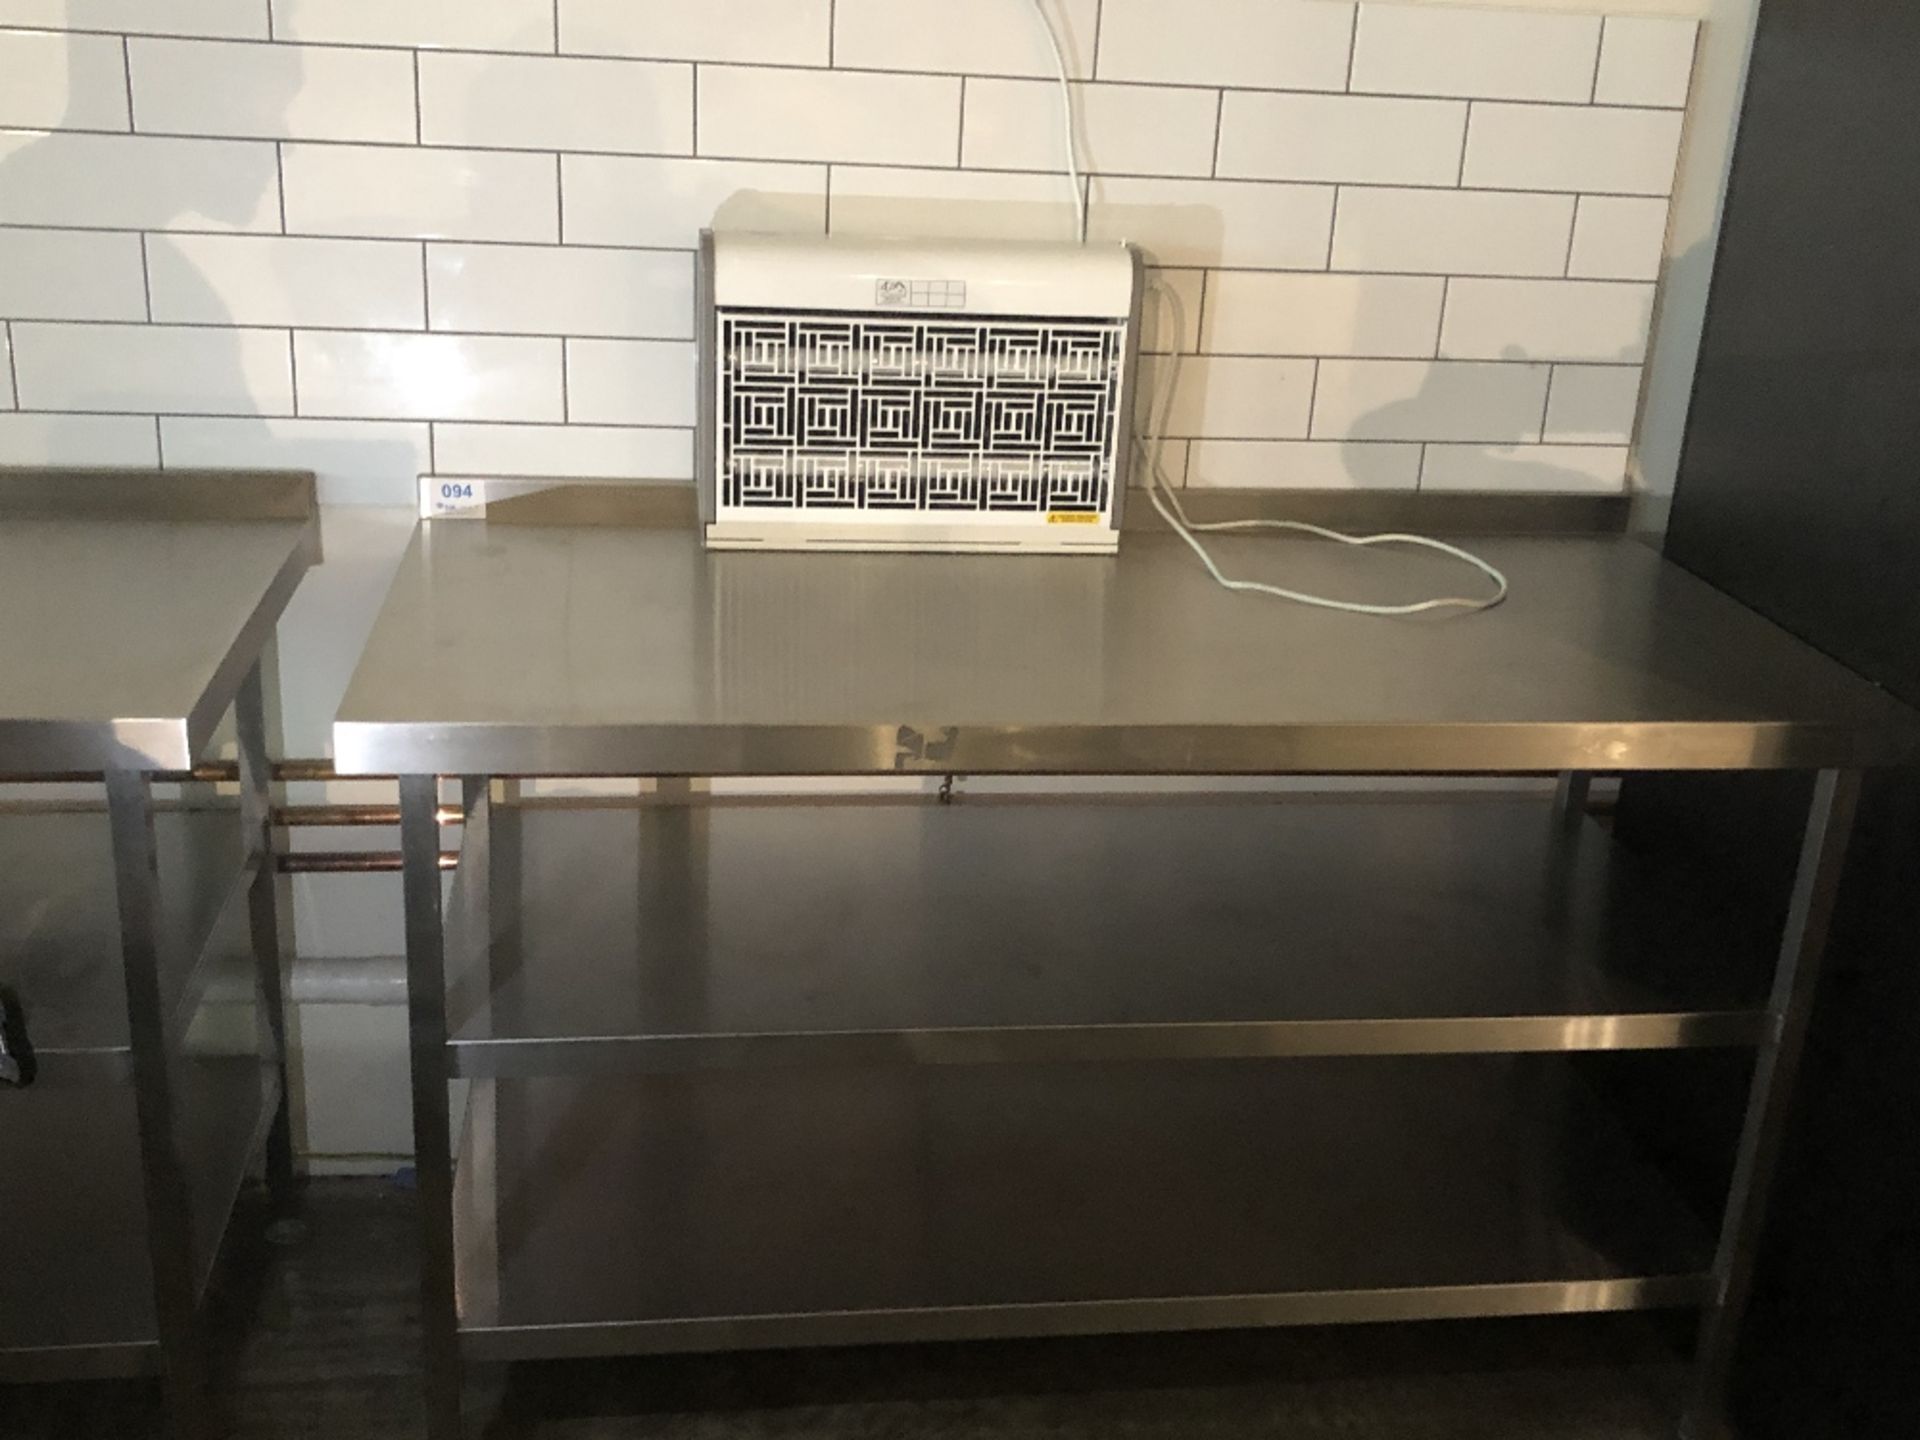 Rectangular Three Tier Stainless Steel Preparation Table - Image 3 of 3